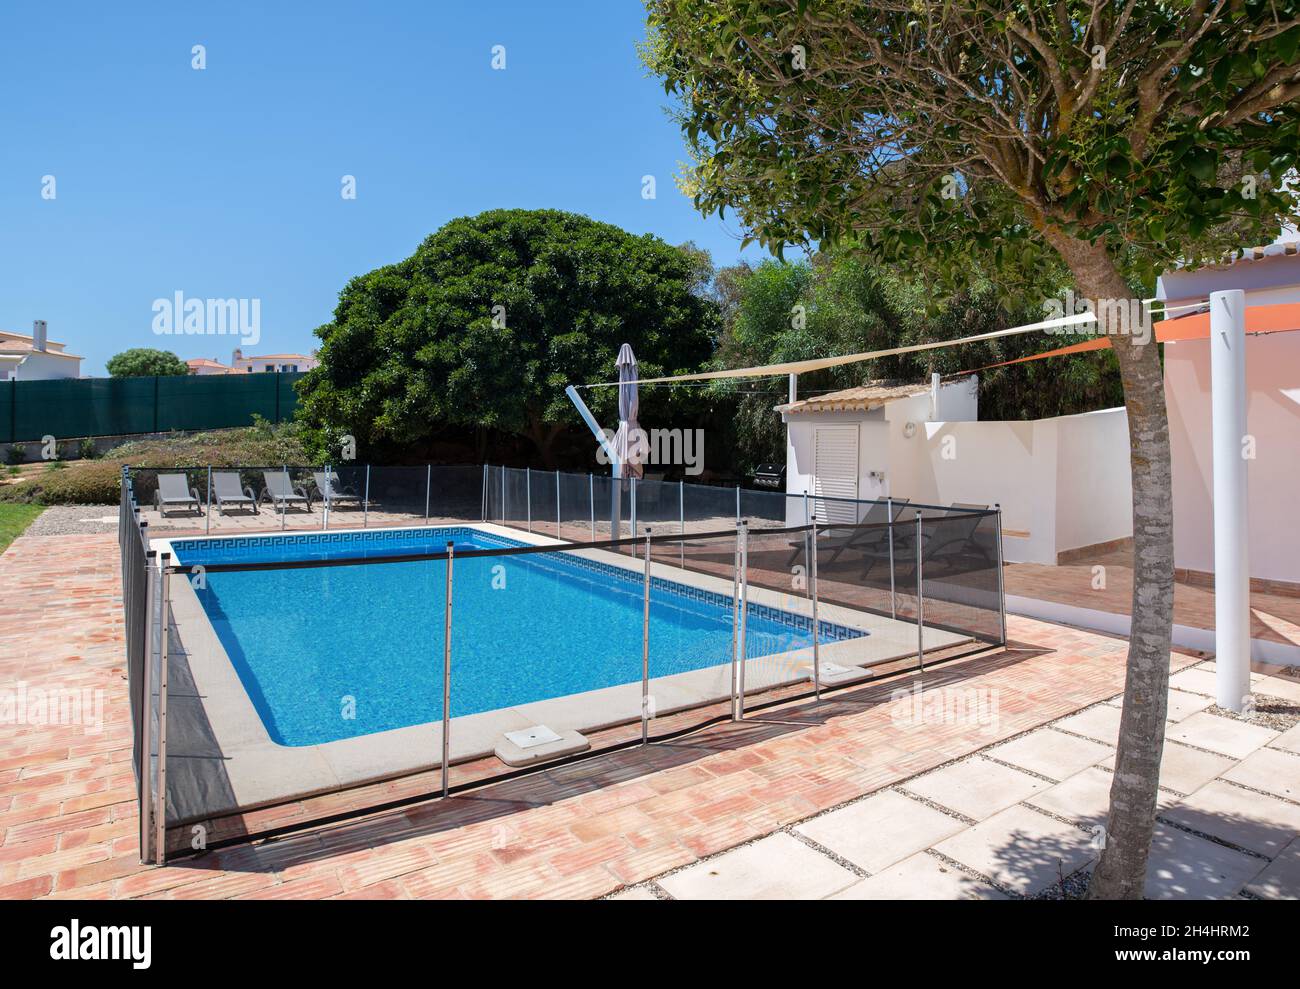 Fenced swimming pool with brick tiled surround in the garden of a white villa Stock Photo